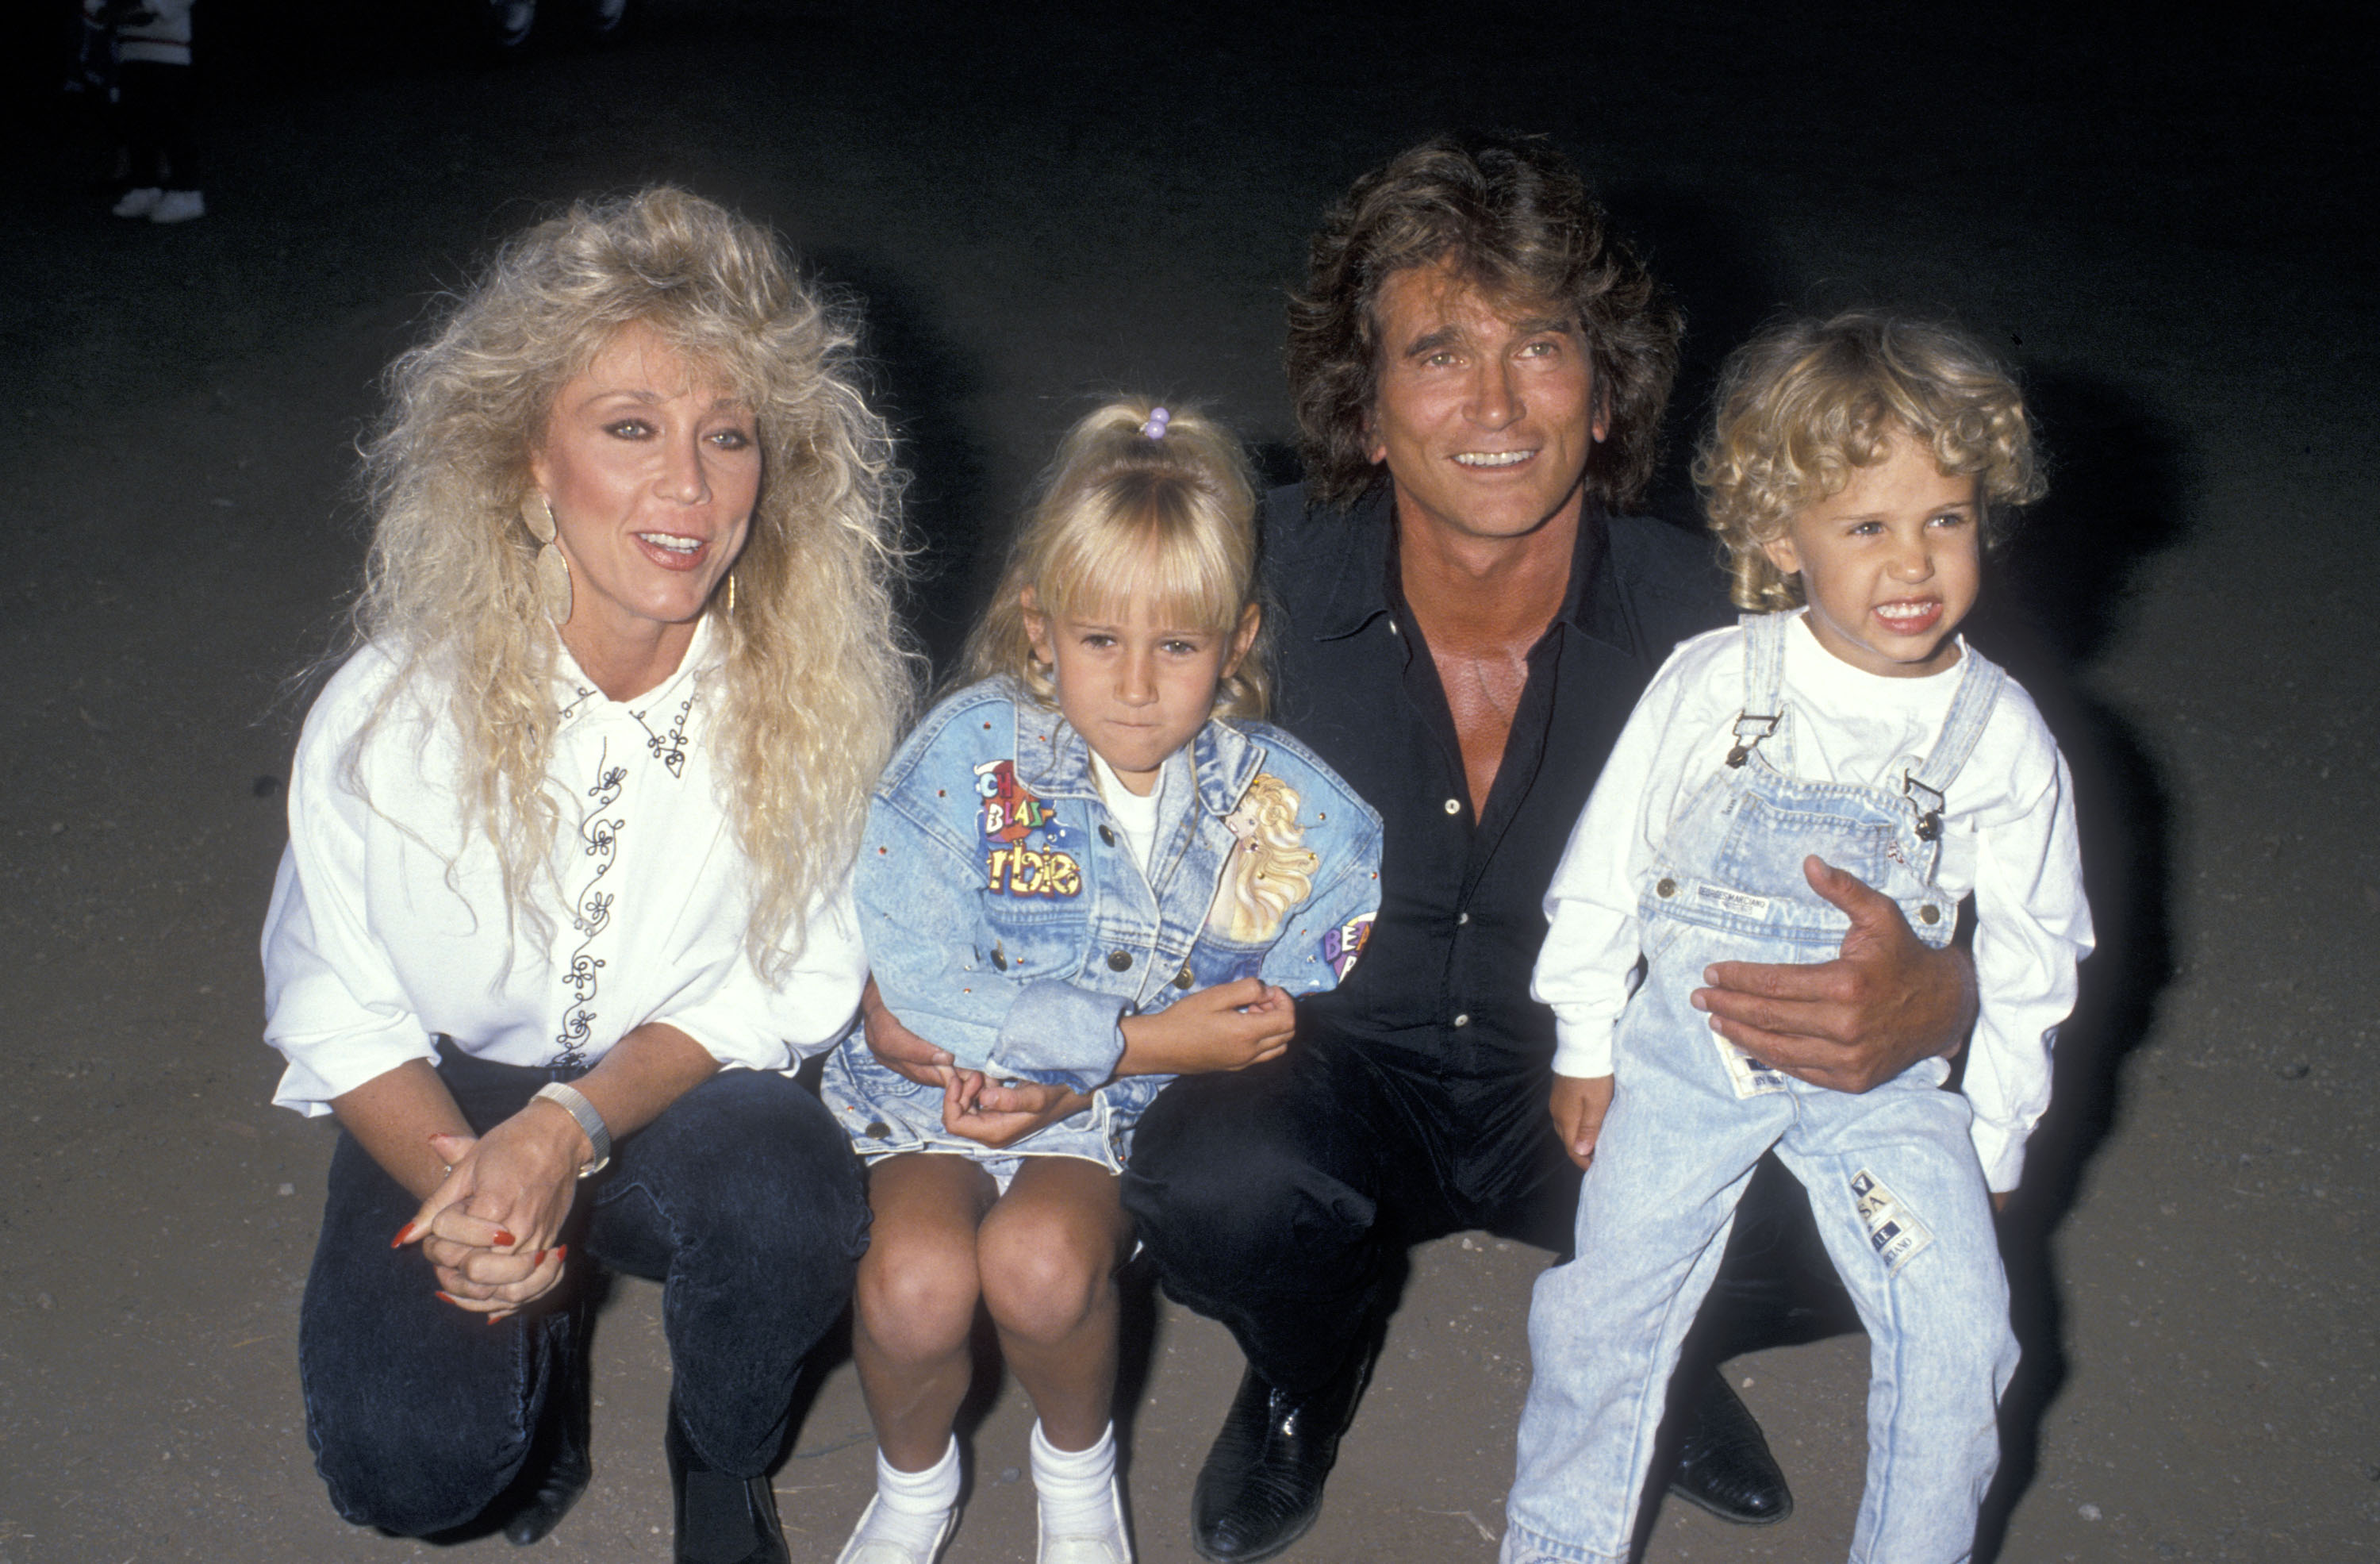 Michael Landon kneels with his wife, Cindy, and his children Jennifer and Sean